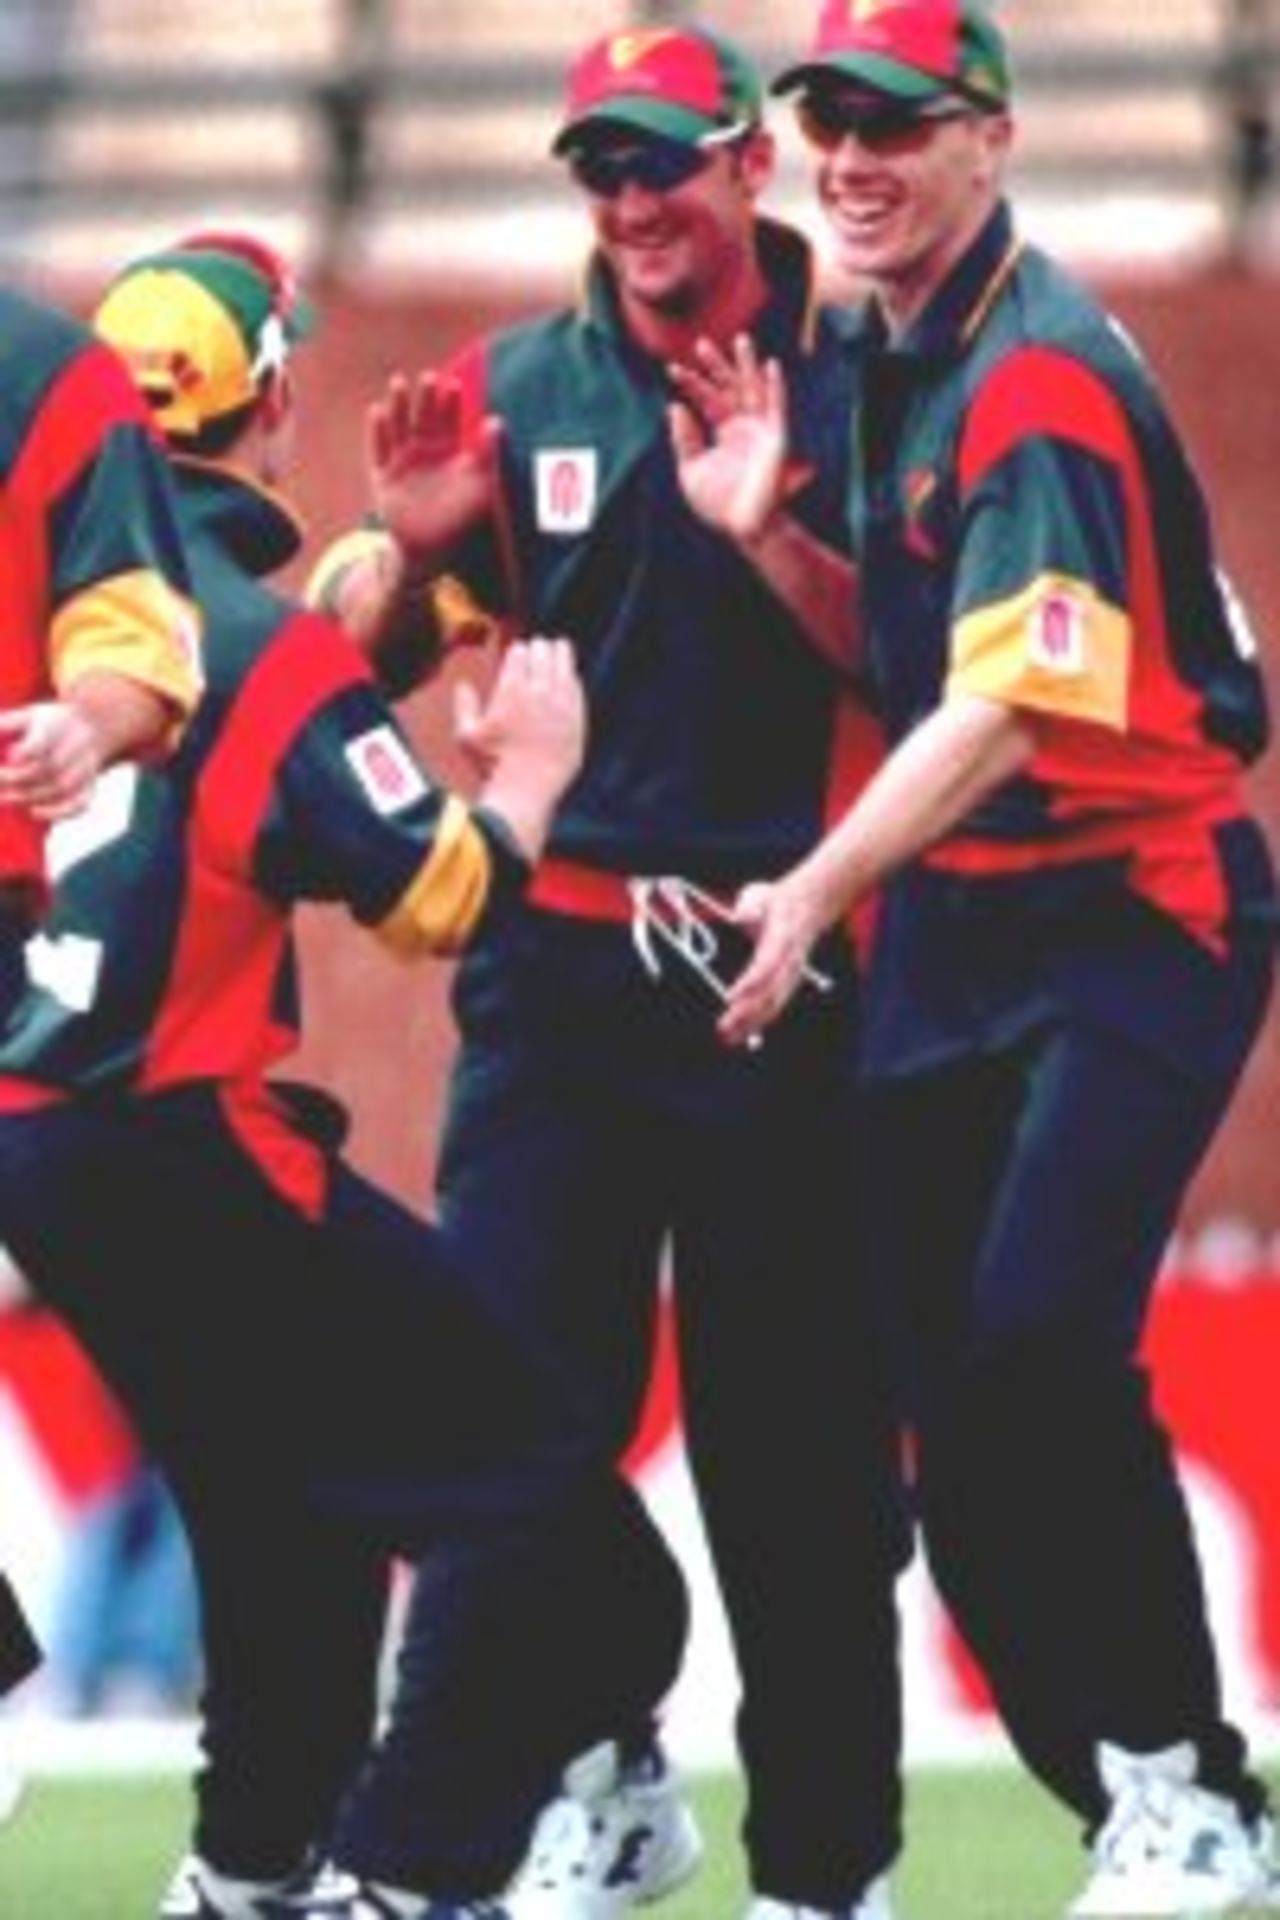 17 Oct 1999: Tasmanian bowler Mark Ridgway celebrates with teamates after taking the wicket of South Australia's Shane Deitz (0) in the first over, caught by Daniel Marsh during the Mercantile Mutual match between the South Australia Redbacks v Tasmania Tigers at the Adelaide Oval, Adelaide, Australia.